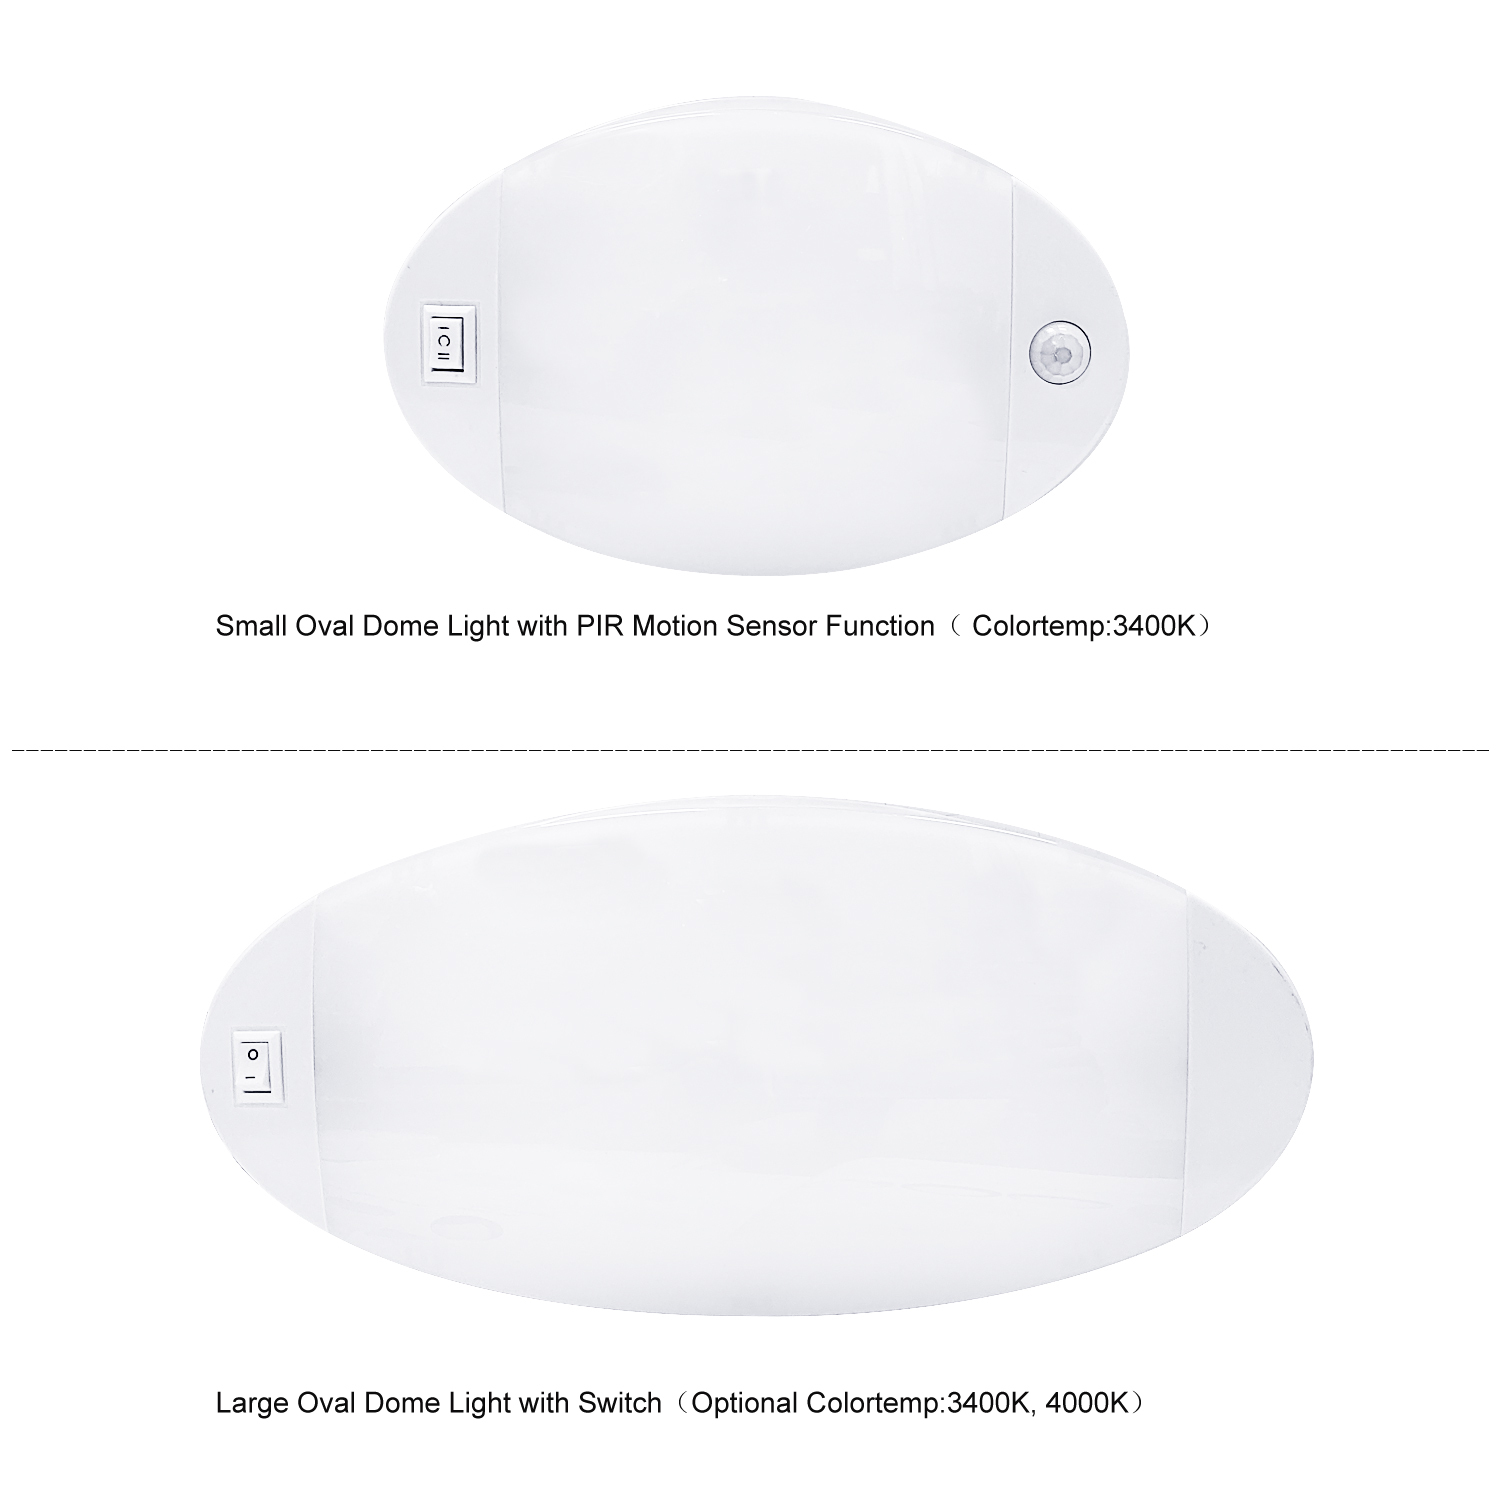 Facon Dimmable LED 12V Oval Pancake Light Interior Ceiling Dome Light 7W  500 LM with On/Off Switch Oval Pancake, White